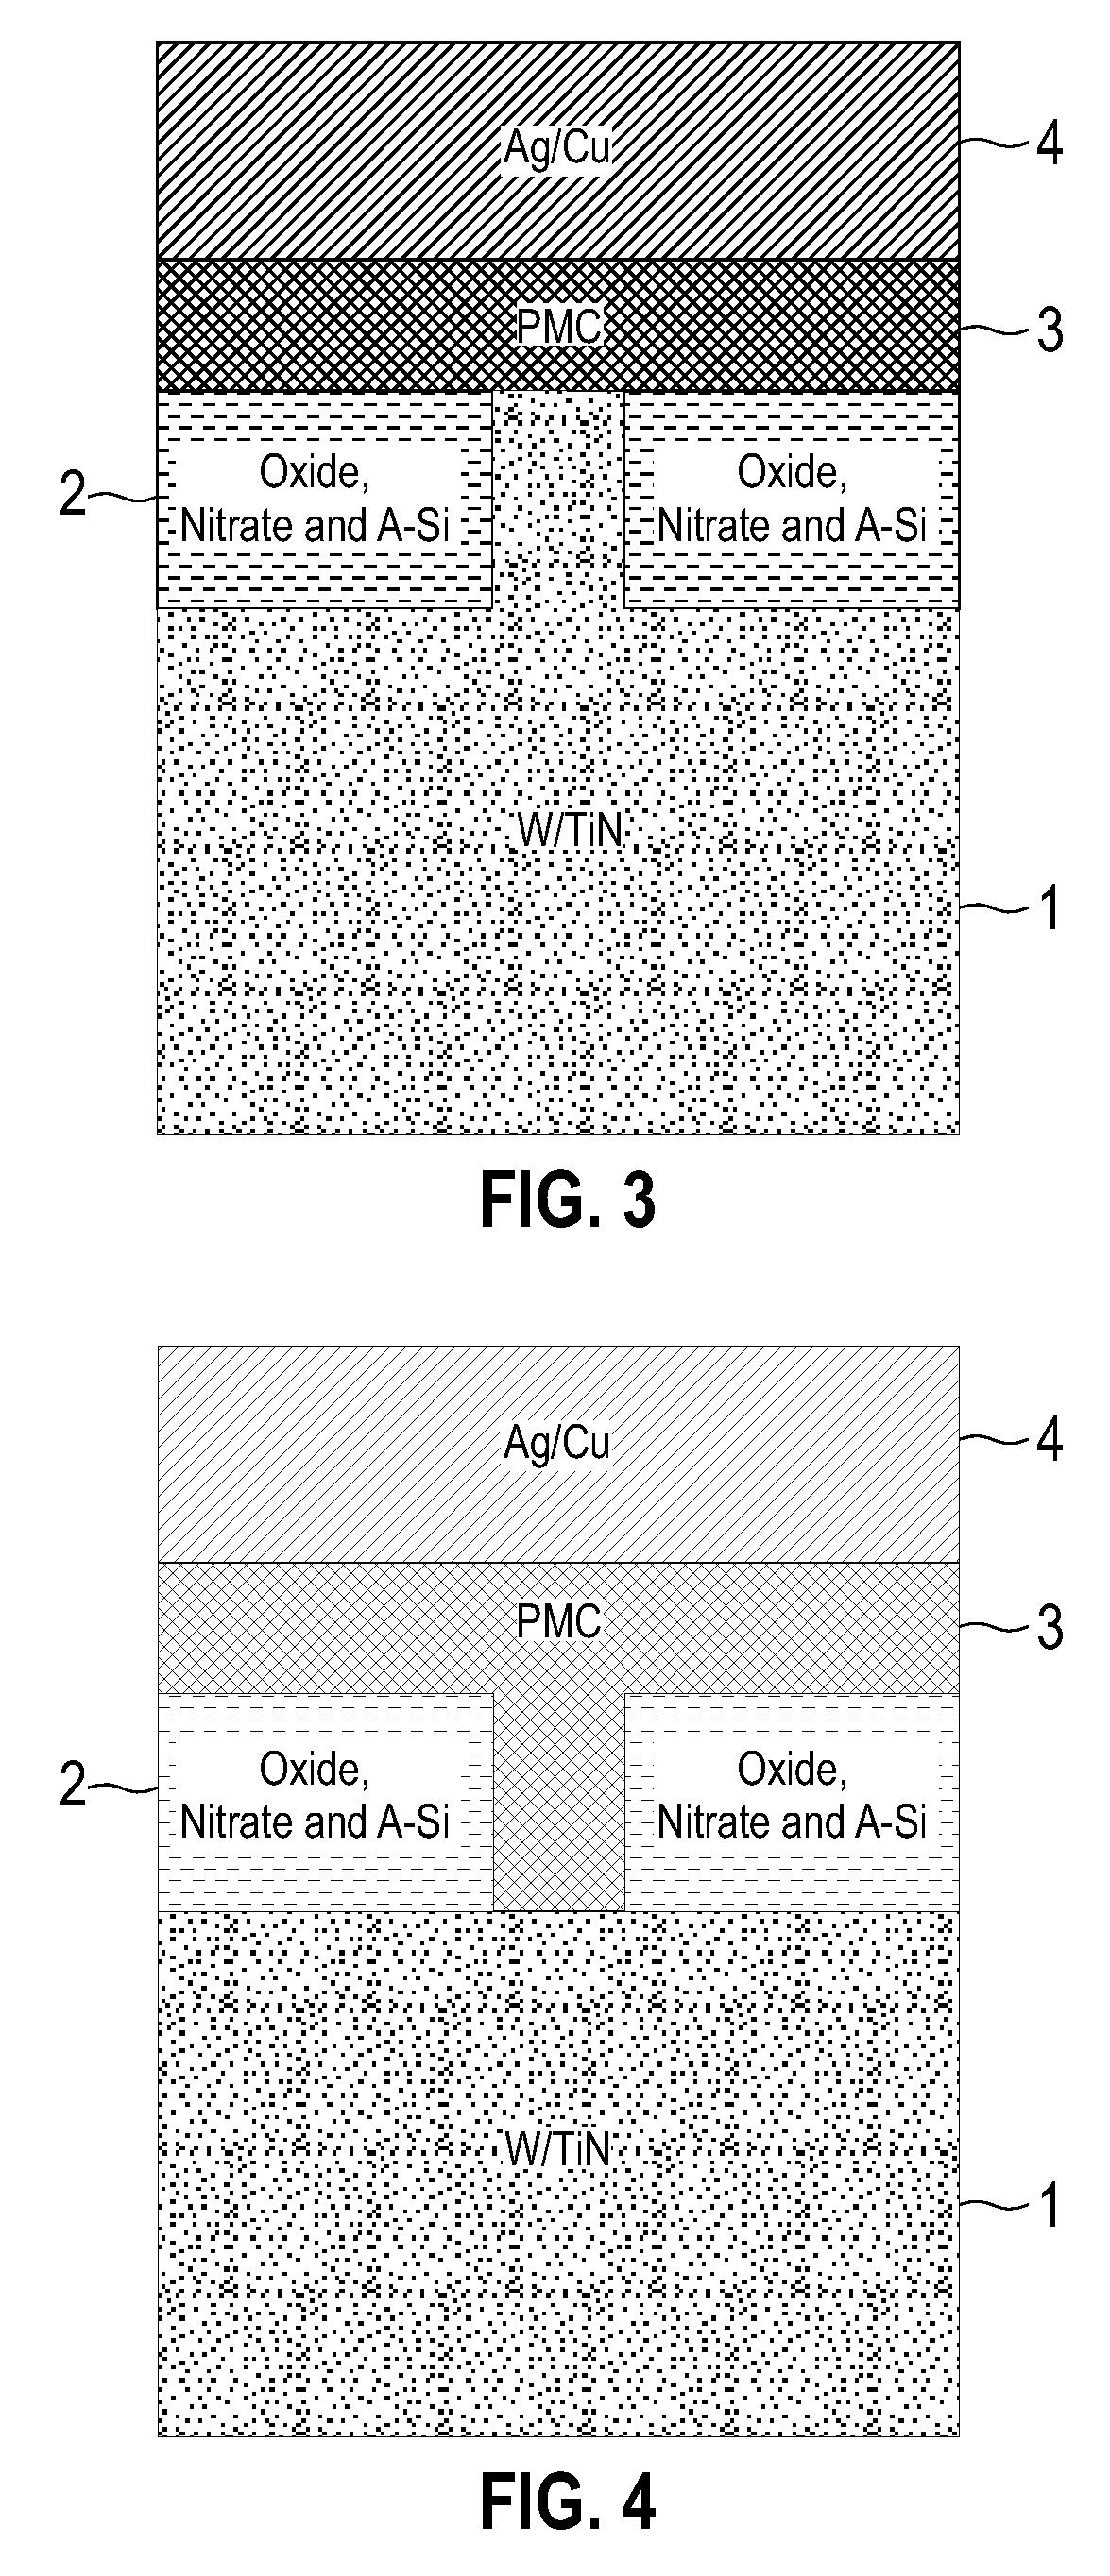 Electrolytic device based on a solution-processed electrolyte